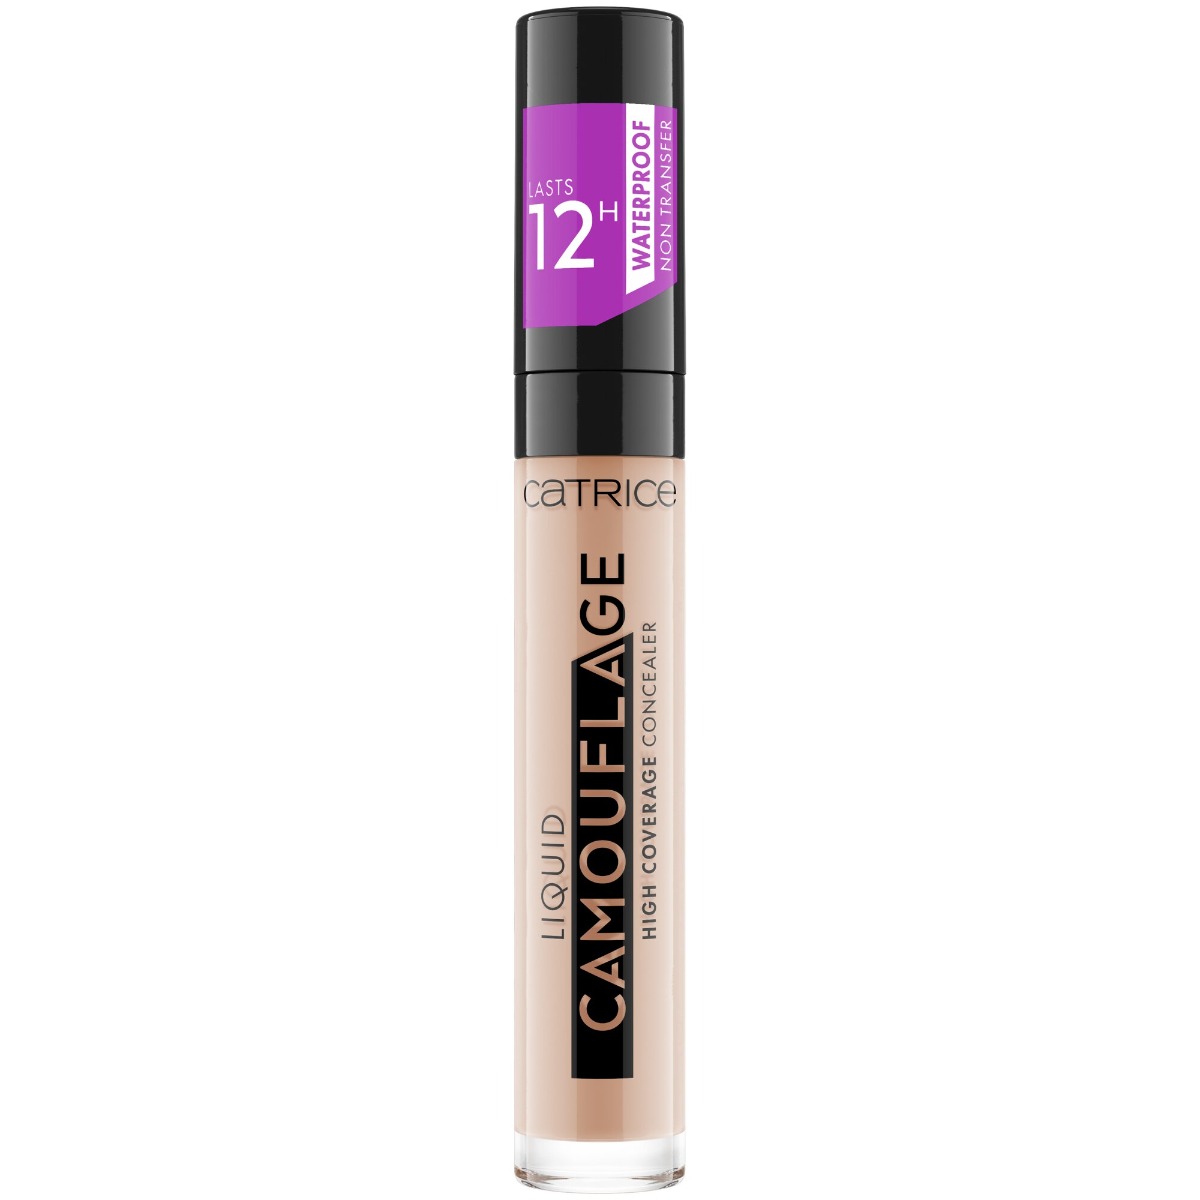 Corector Liquid Camouflage High Coverage Concealer 007 - Natural Rose, 5ml, Catrice